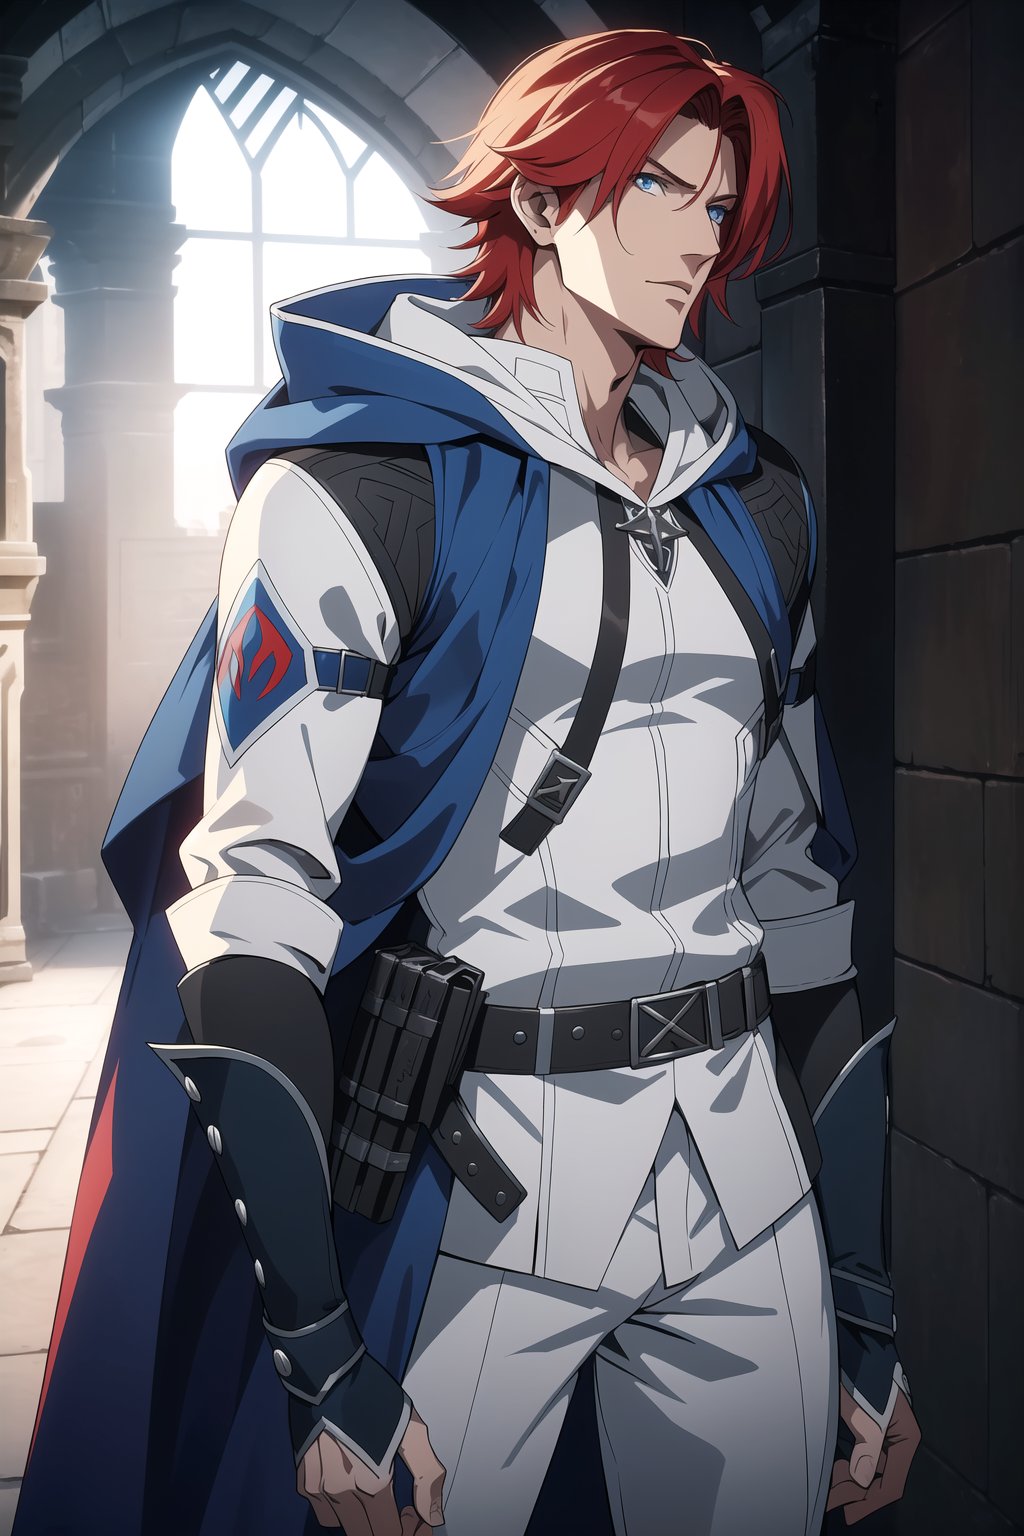 (Masterpiece, Best Quality), (A Handsome 25-Year-Old British Male Werewolf Hunter), (Spiky Short Red Hair:1.2), (Pale Skin), (Blue Eyes), (Wearing White and Blue Tactical Assassin Outfit with Hood:1.4), (Modern City Road at Noon:1.2), (Standing Pose:1.4), Centered, (Half Body Shot:1.4), (From Front Shot:1.4), Insane Details, Intricate Face Detail, Intricate Hand Details, Cinematic Shot and Lighting, Realistic and Vibrant Colors, Sharp Focus, Ultra Detailed, Realistic Images, Depth of Field, Incredibly Realistic Environment and Scene, Master Composition and Cinematography, castlevania style,castlevania style